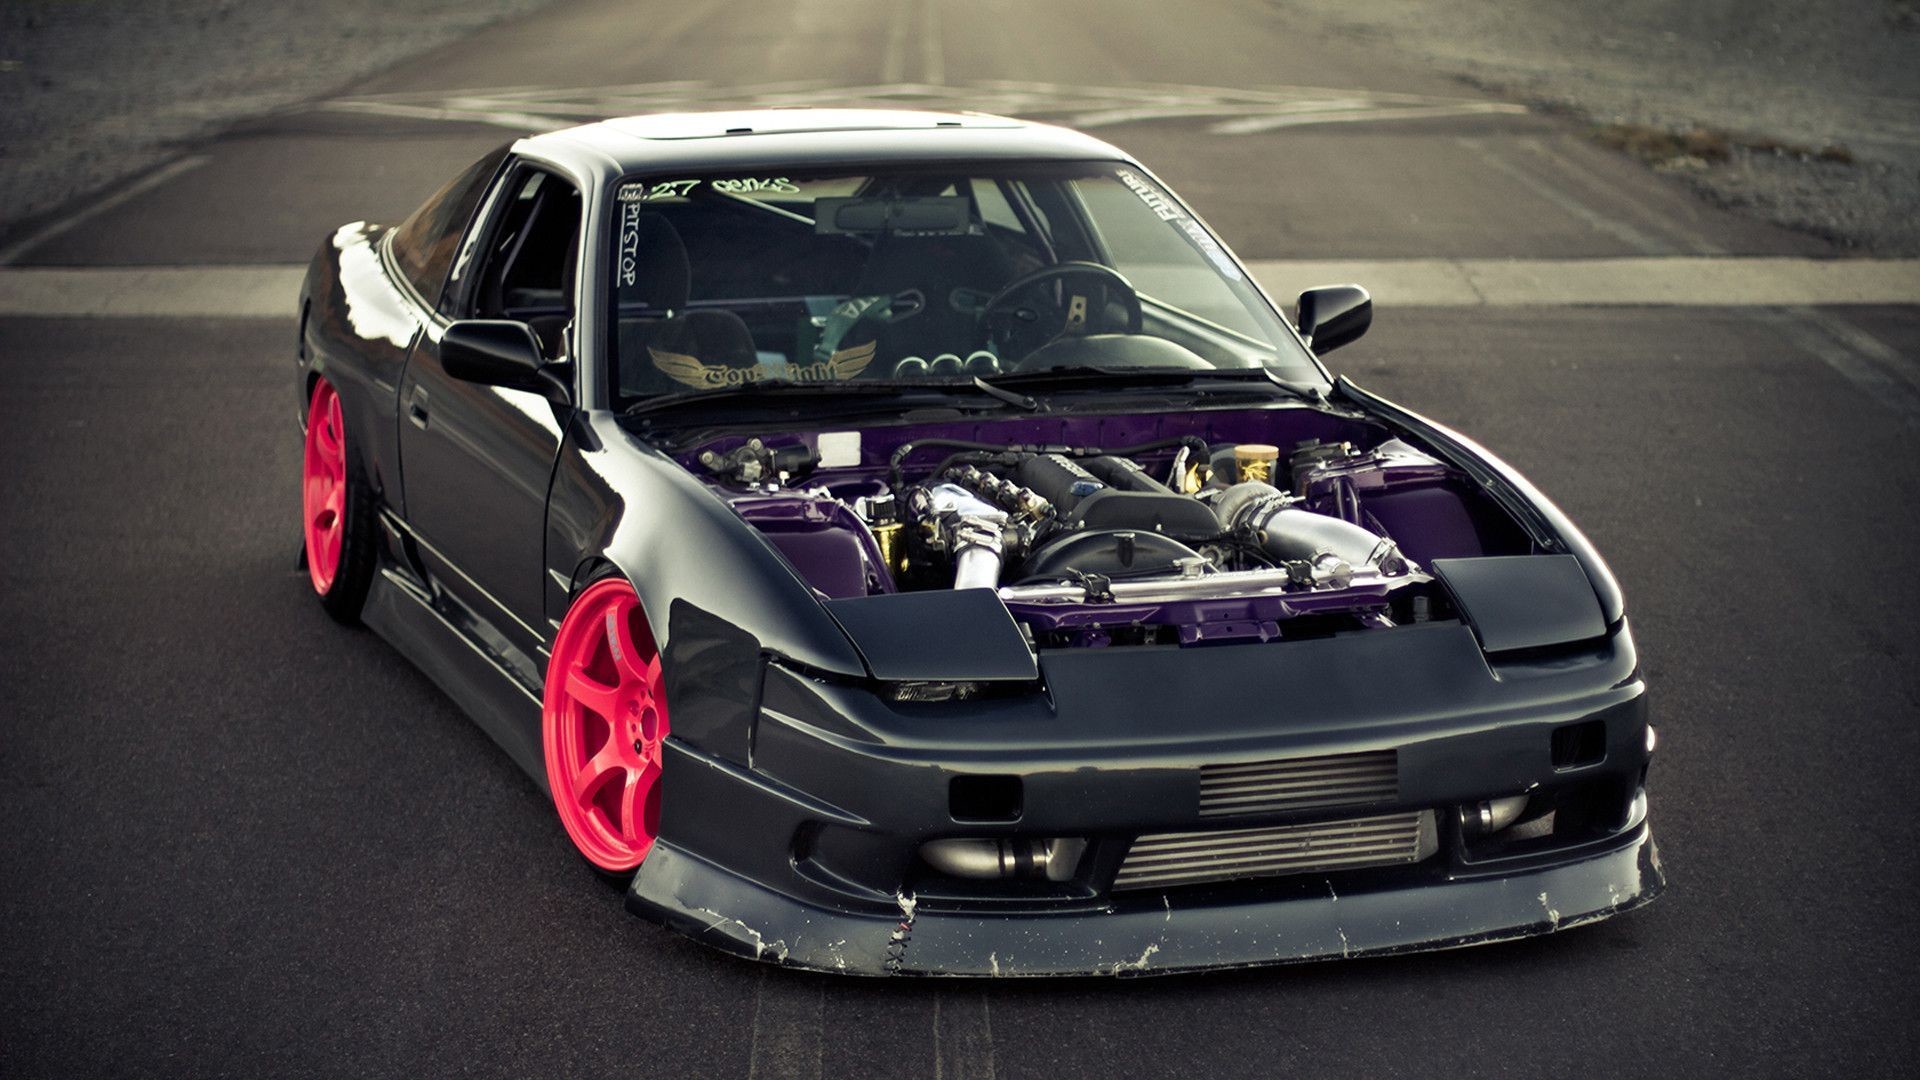 1920x1080 Wallpapers drift, nissan 240sx, 180sx - car pictures and photos .